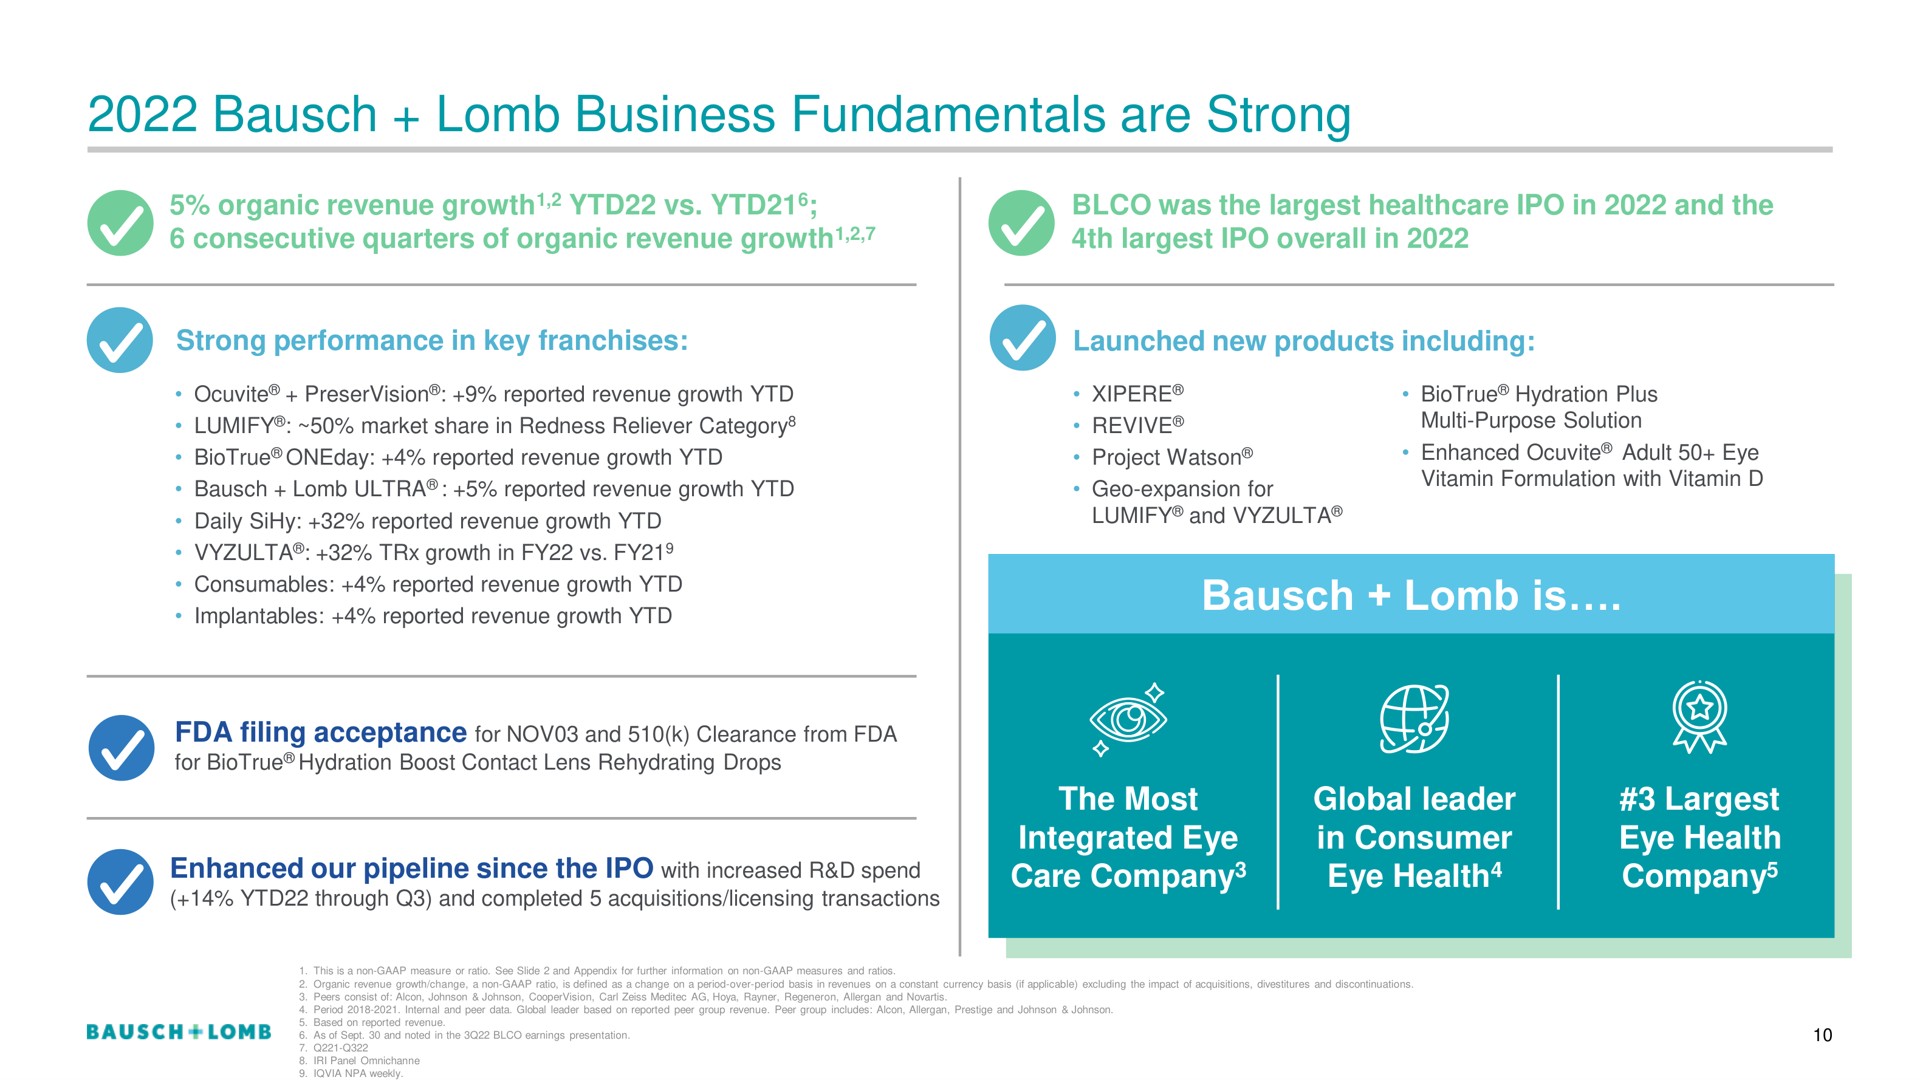 business fundamentals are strong | Bausch+Lomb